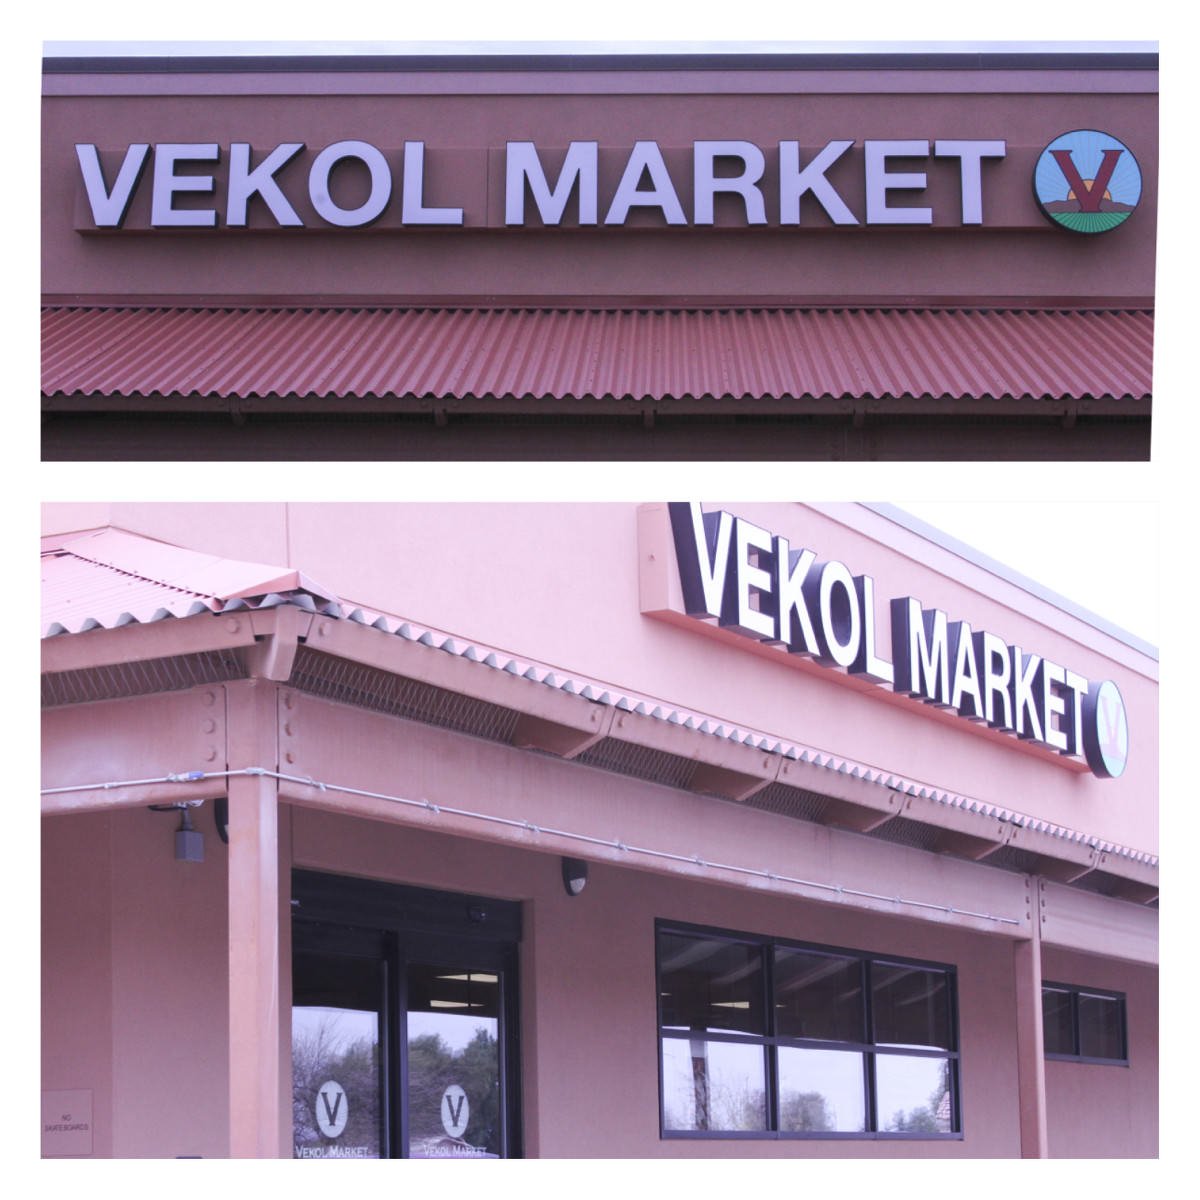 2012 - The Ak-Chin Indian Community opened the new Vekol Market in April. Vekol Market includes a deli, a wide selection of groceries, culturally indigenous foods, a café, a patio with outside seating, and space for a farmer’s market.